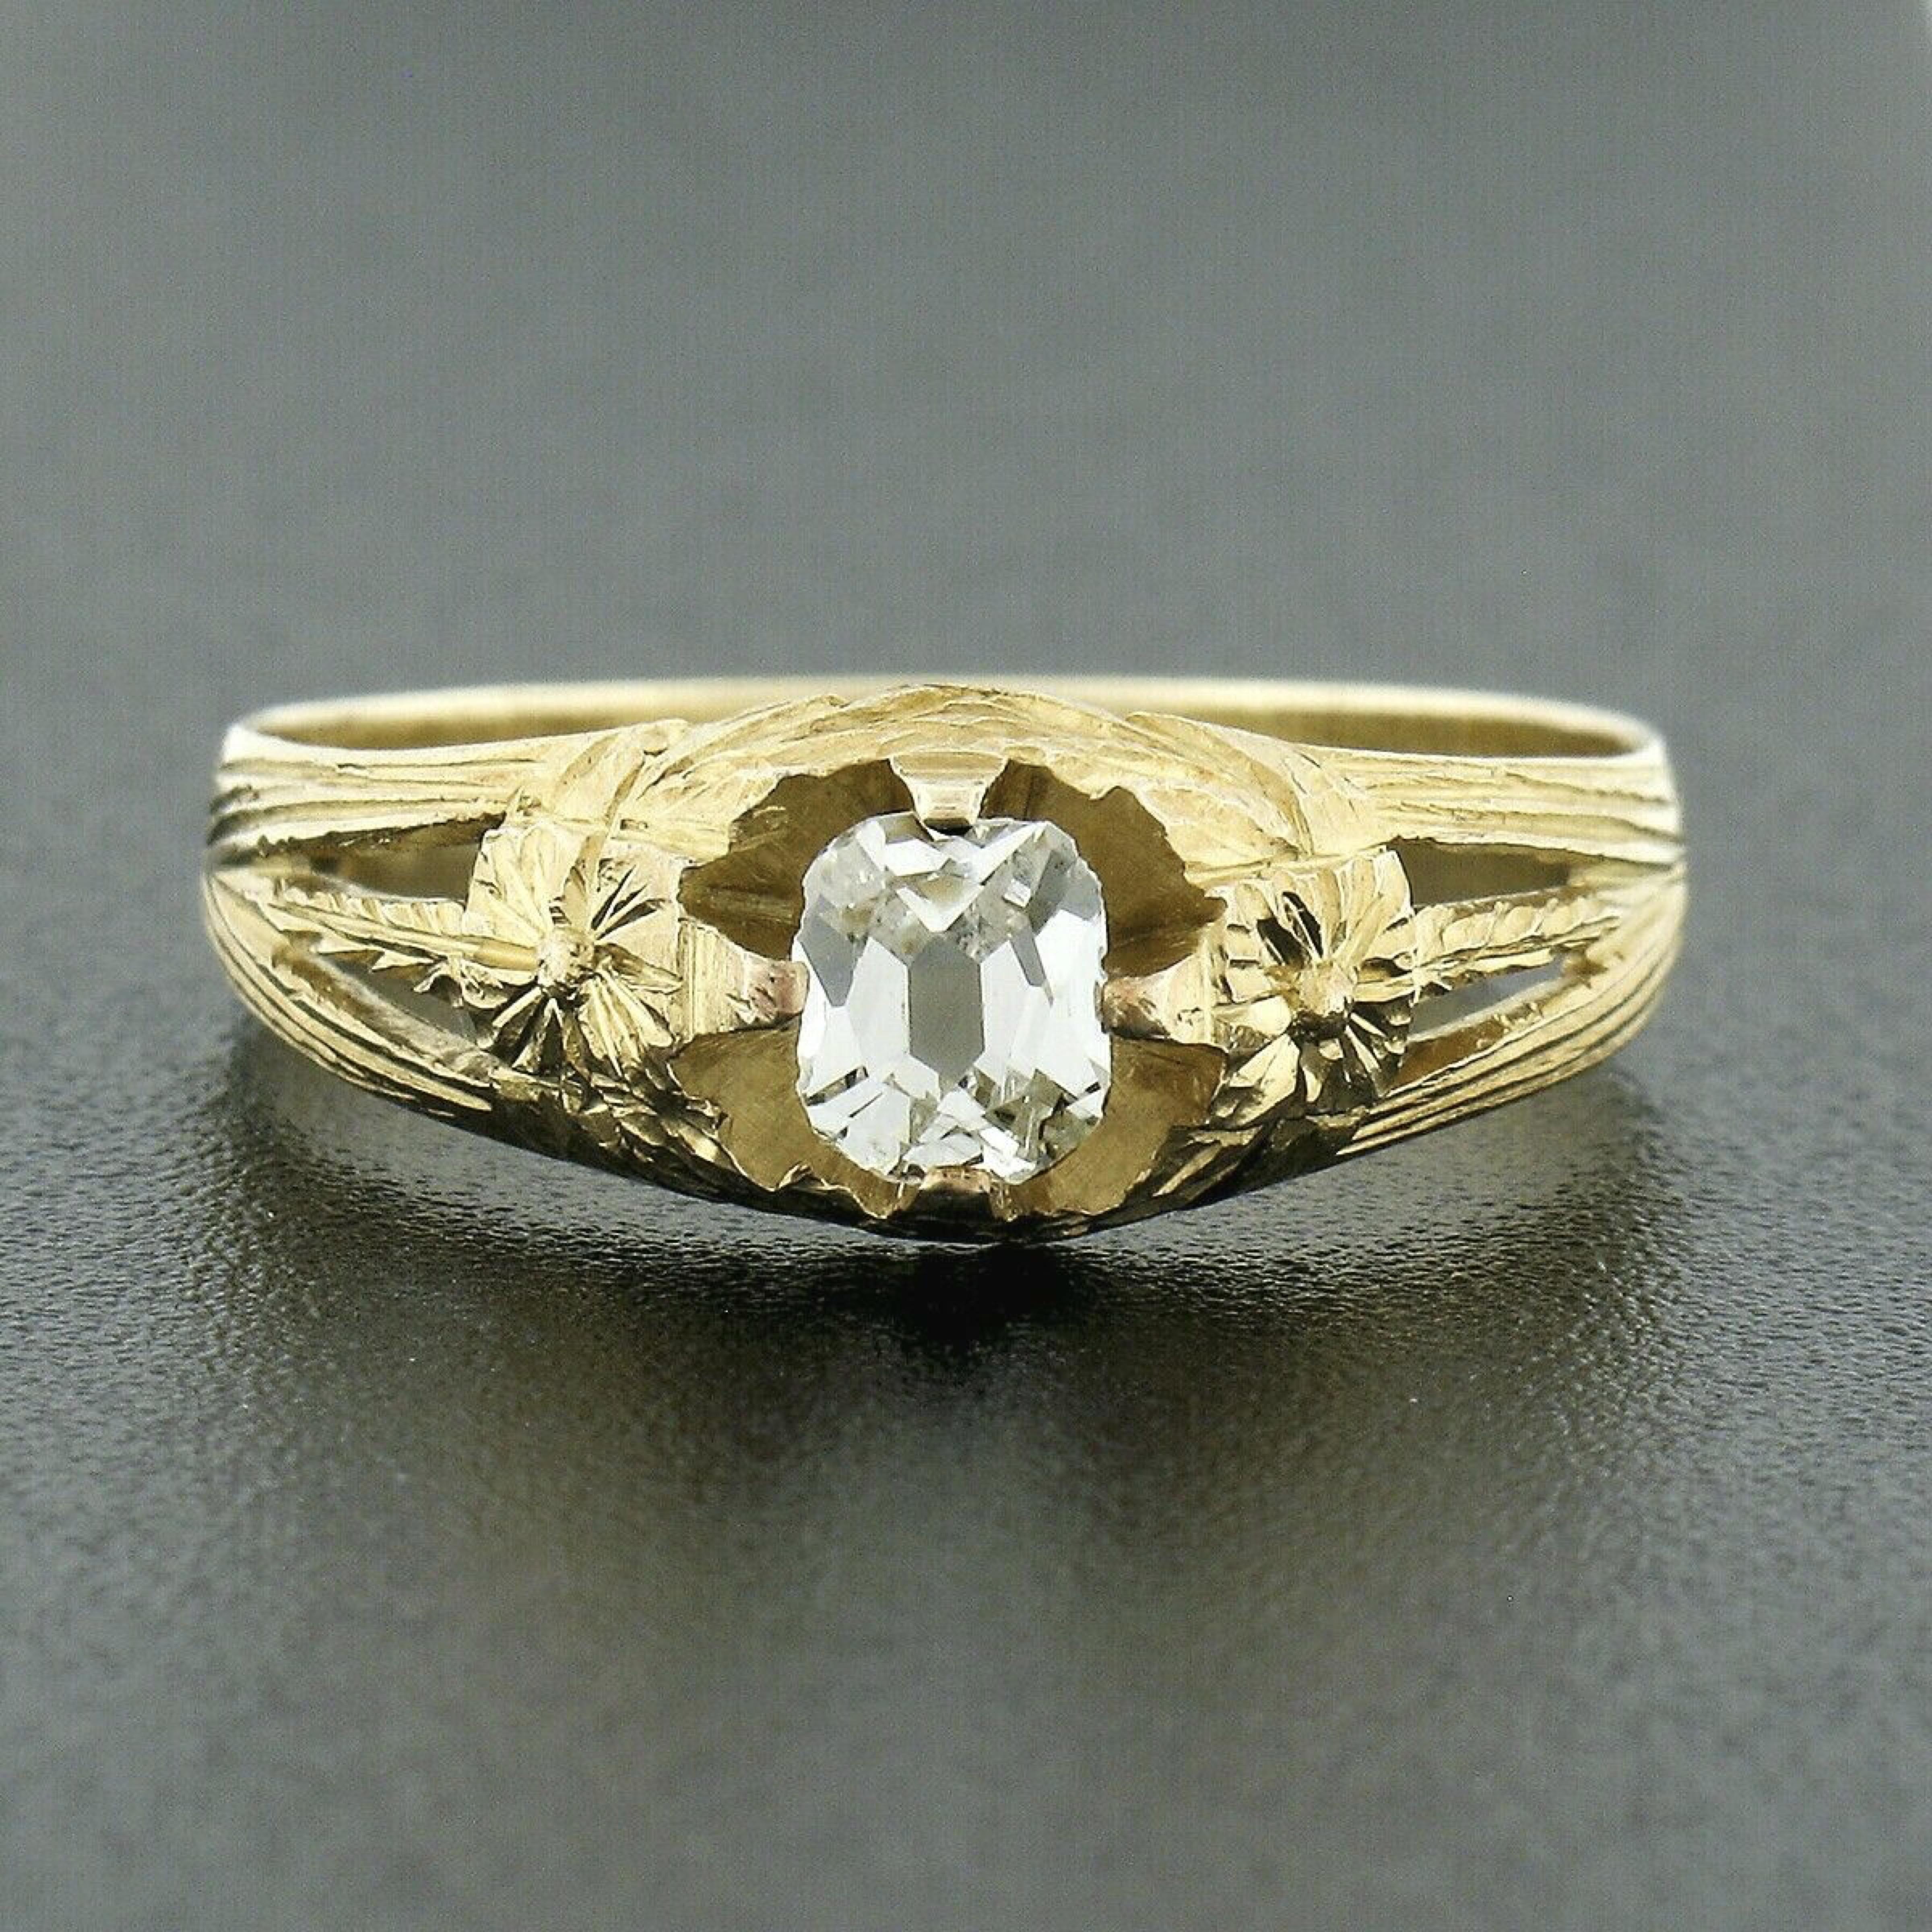 Here we have a rare and absolutely incredible antique engagement ring that was crafted during the art nouveau period from solid 14k yellow gold. It features a fine diamond with a unique old mine cut diamond neatly prong set at the open center,